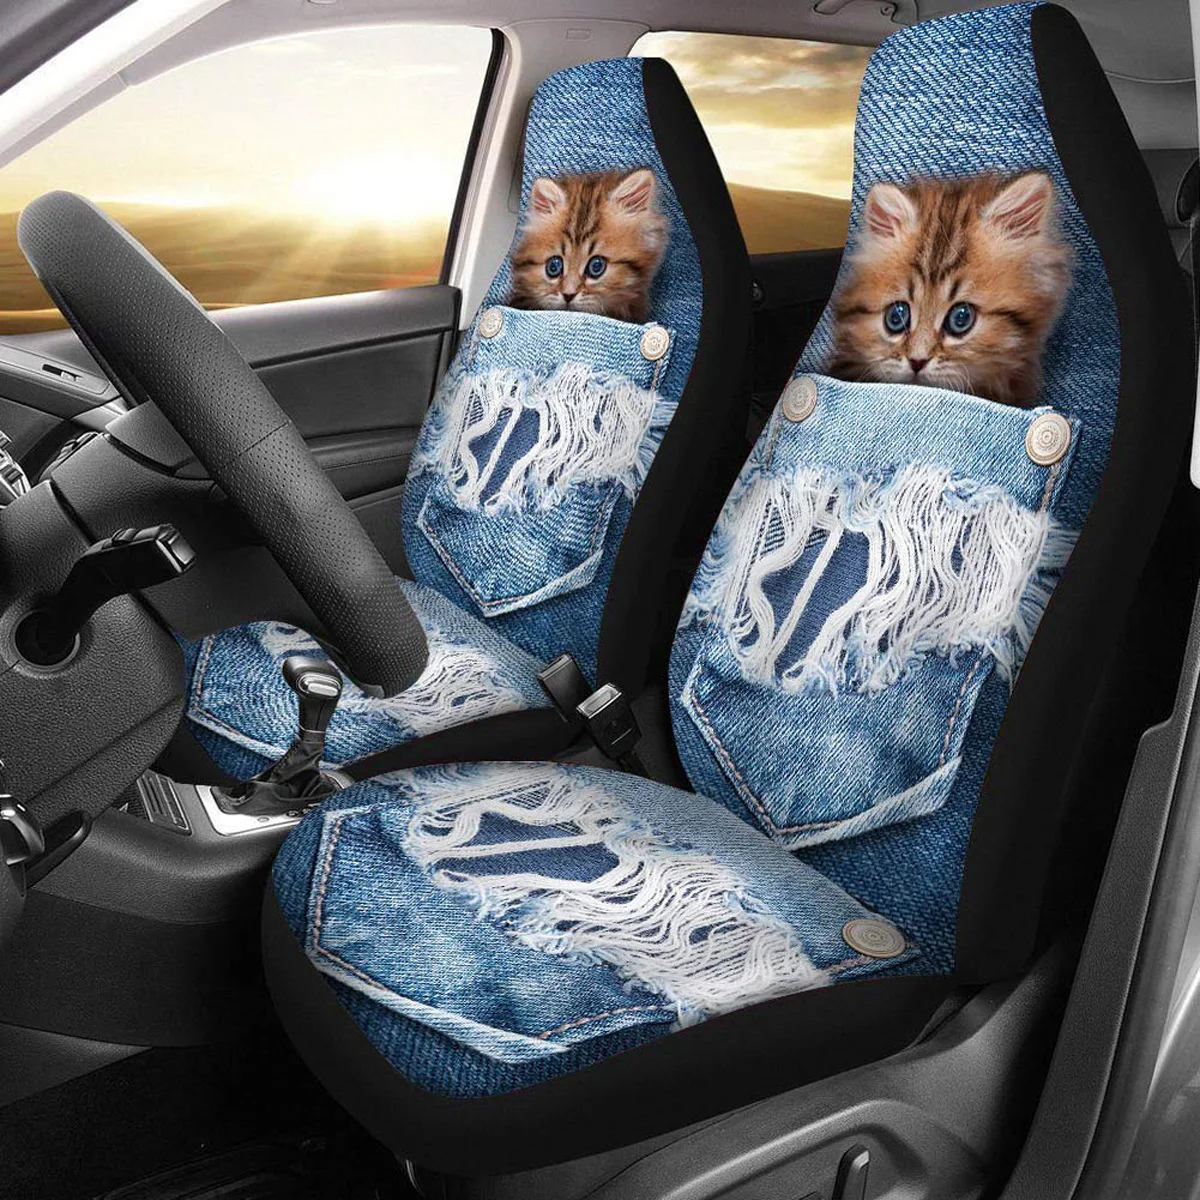 

3D Animal Printing Full Set Car Seat Covers fit Most Cars Cute Cat Pets Pattern Vehicle Seat Covers Front